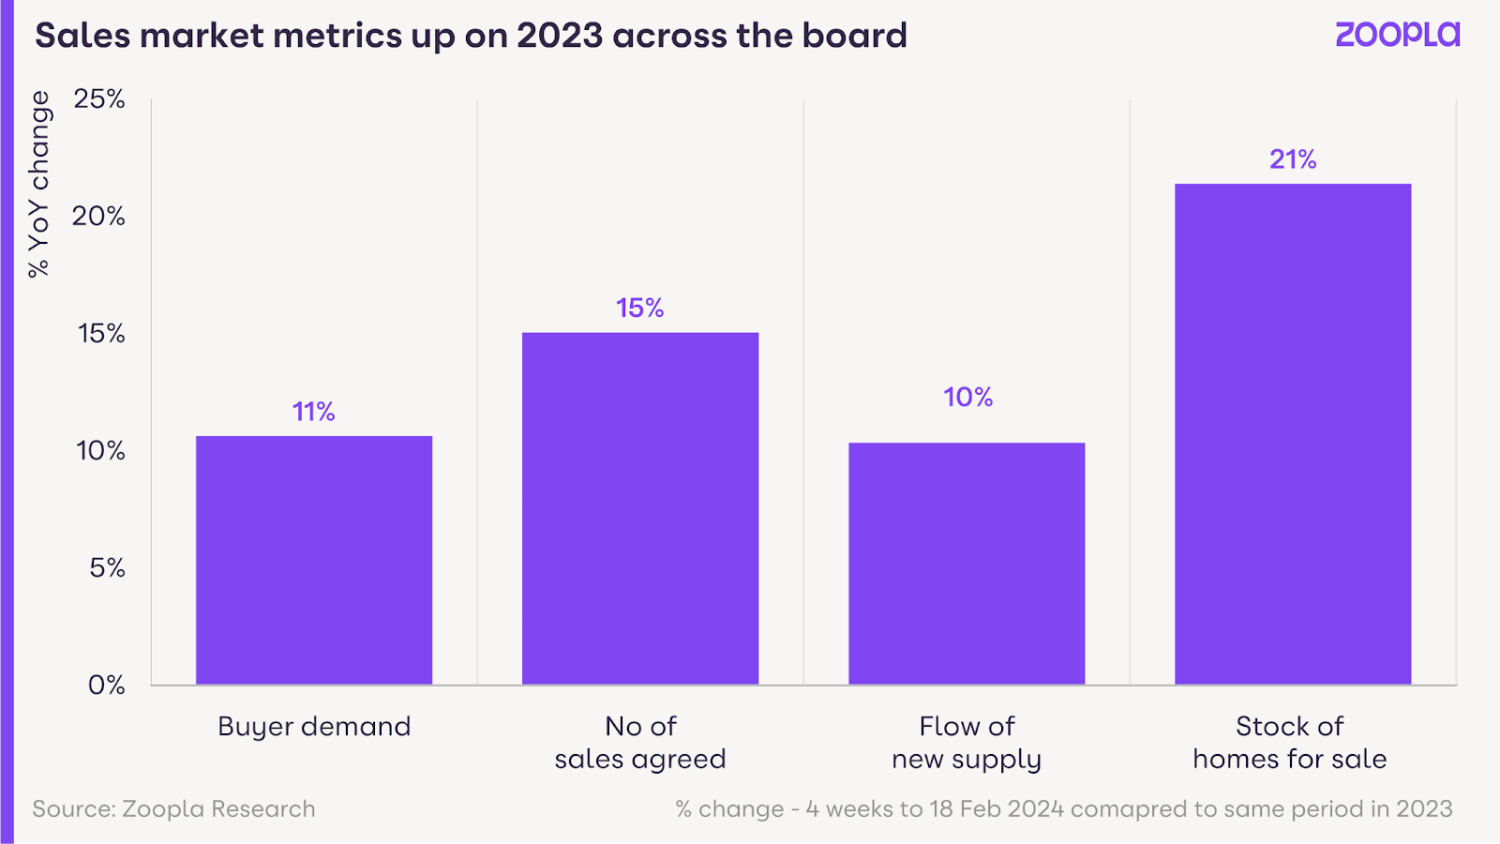 Graph showing sales market metrics up on 2023 across the board